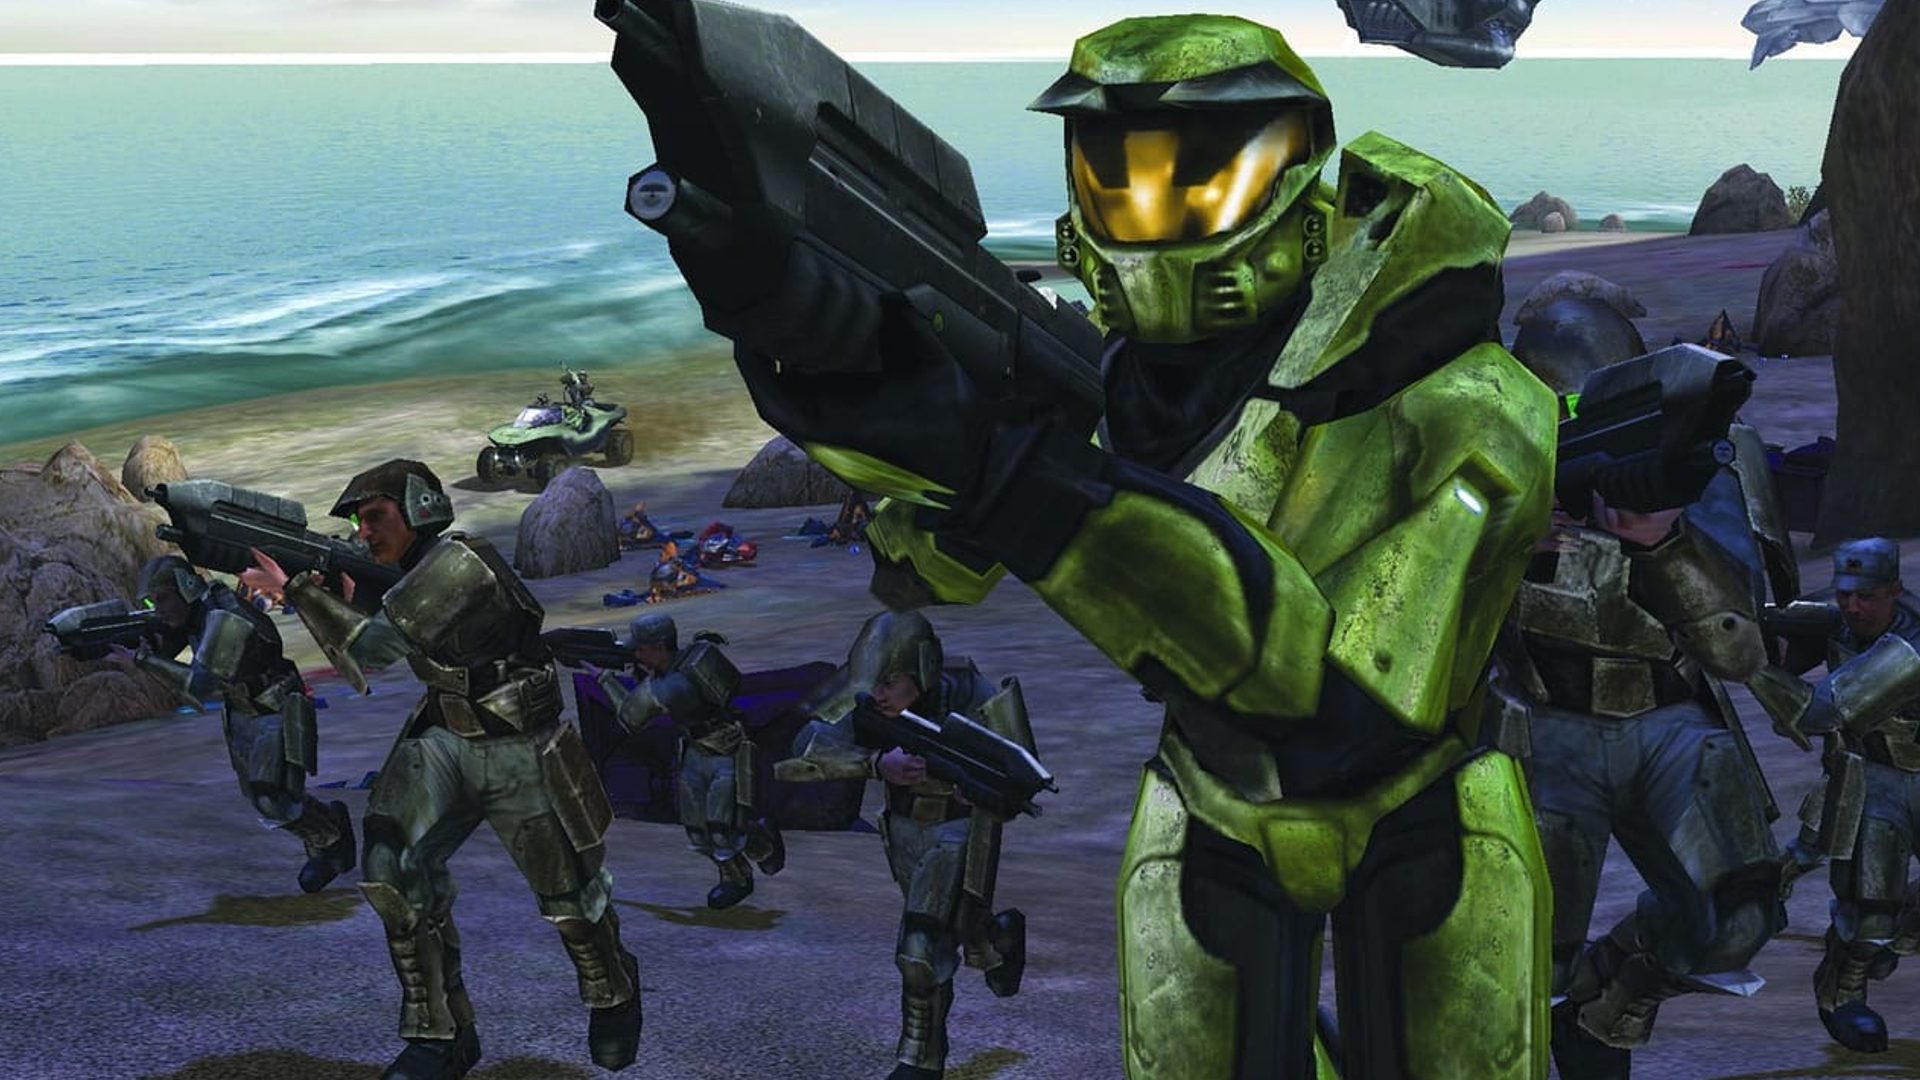 Master Chief can be seen running with a number of other soldiers